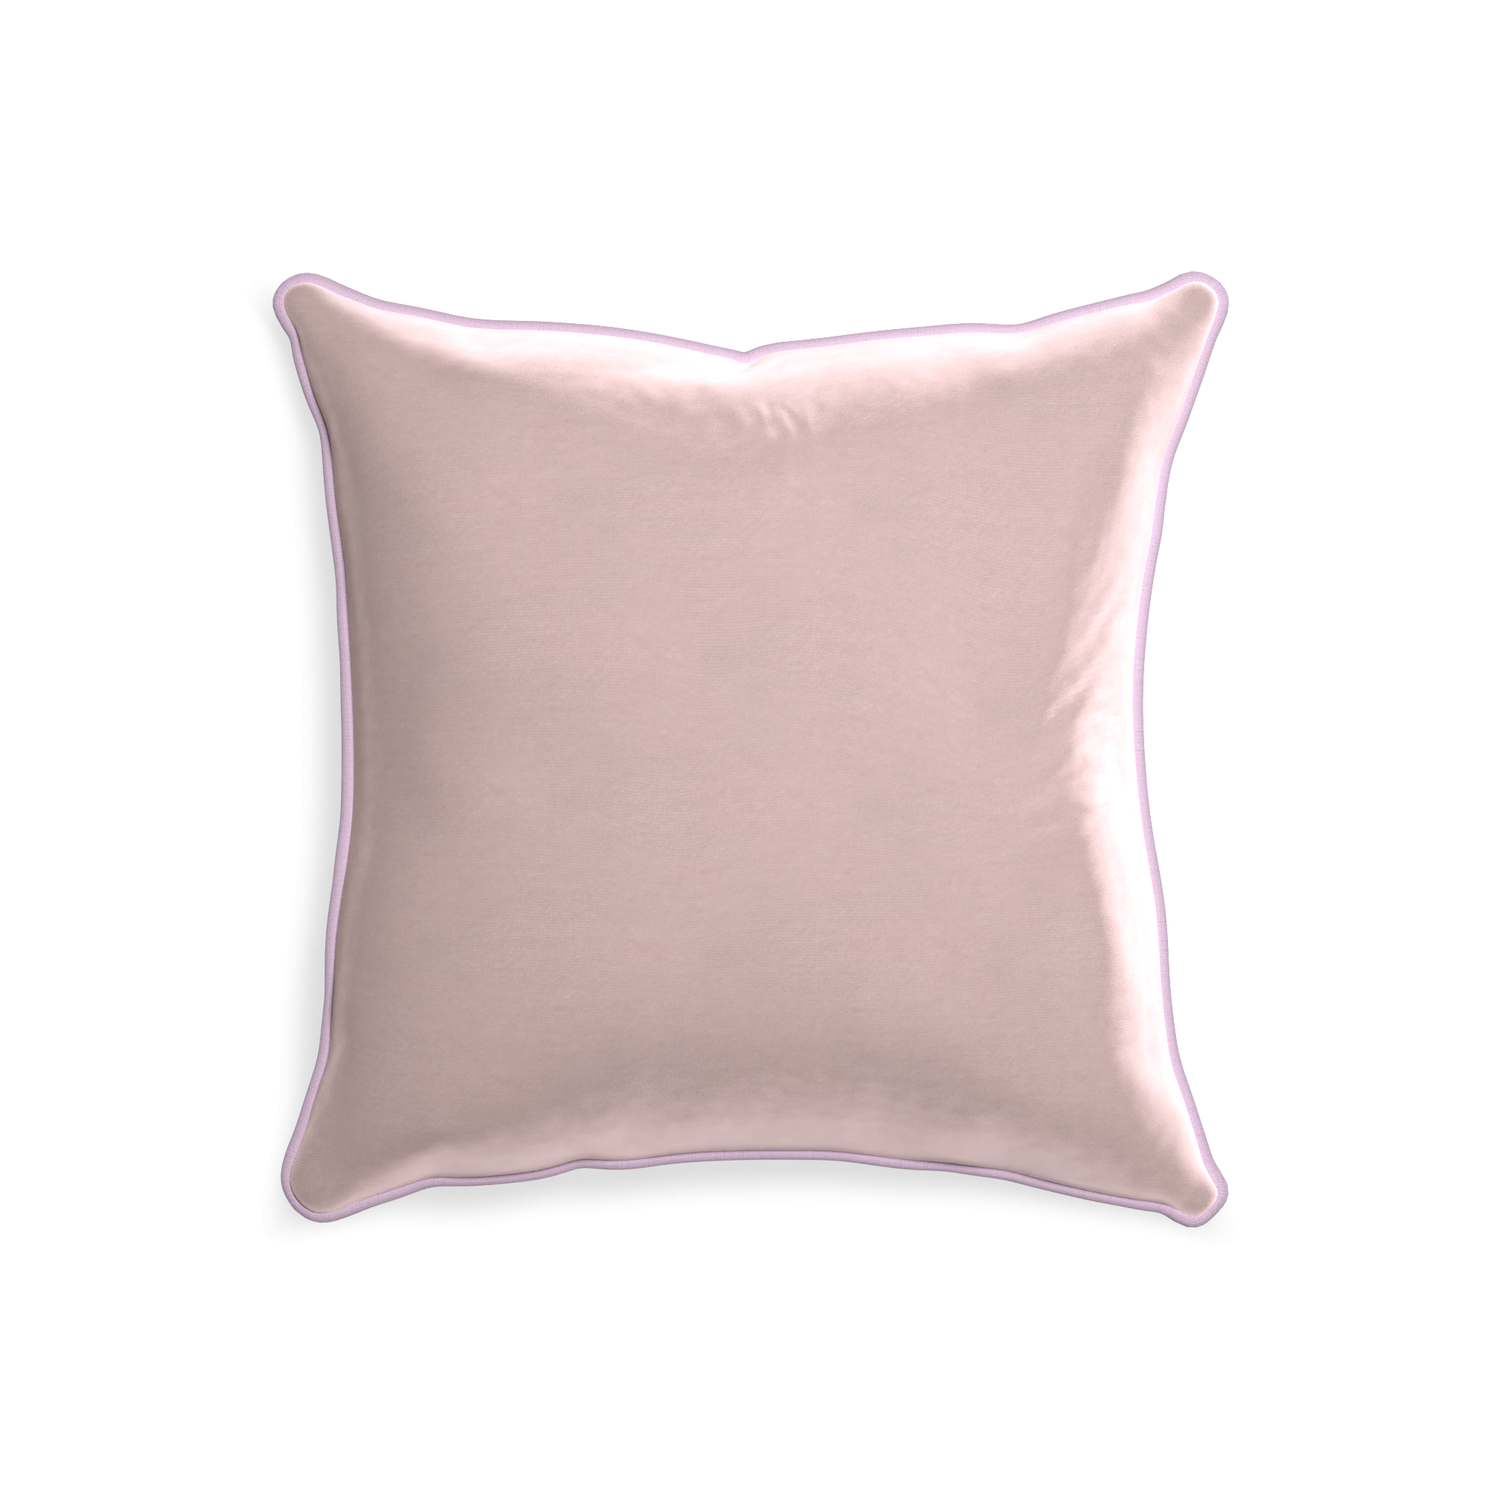 square light pink velvet pillow with lilac piping